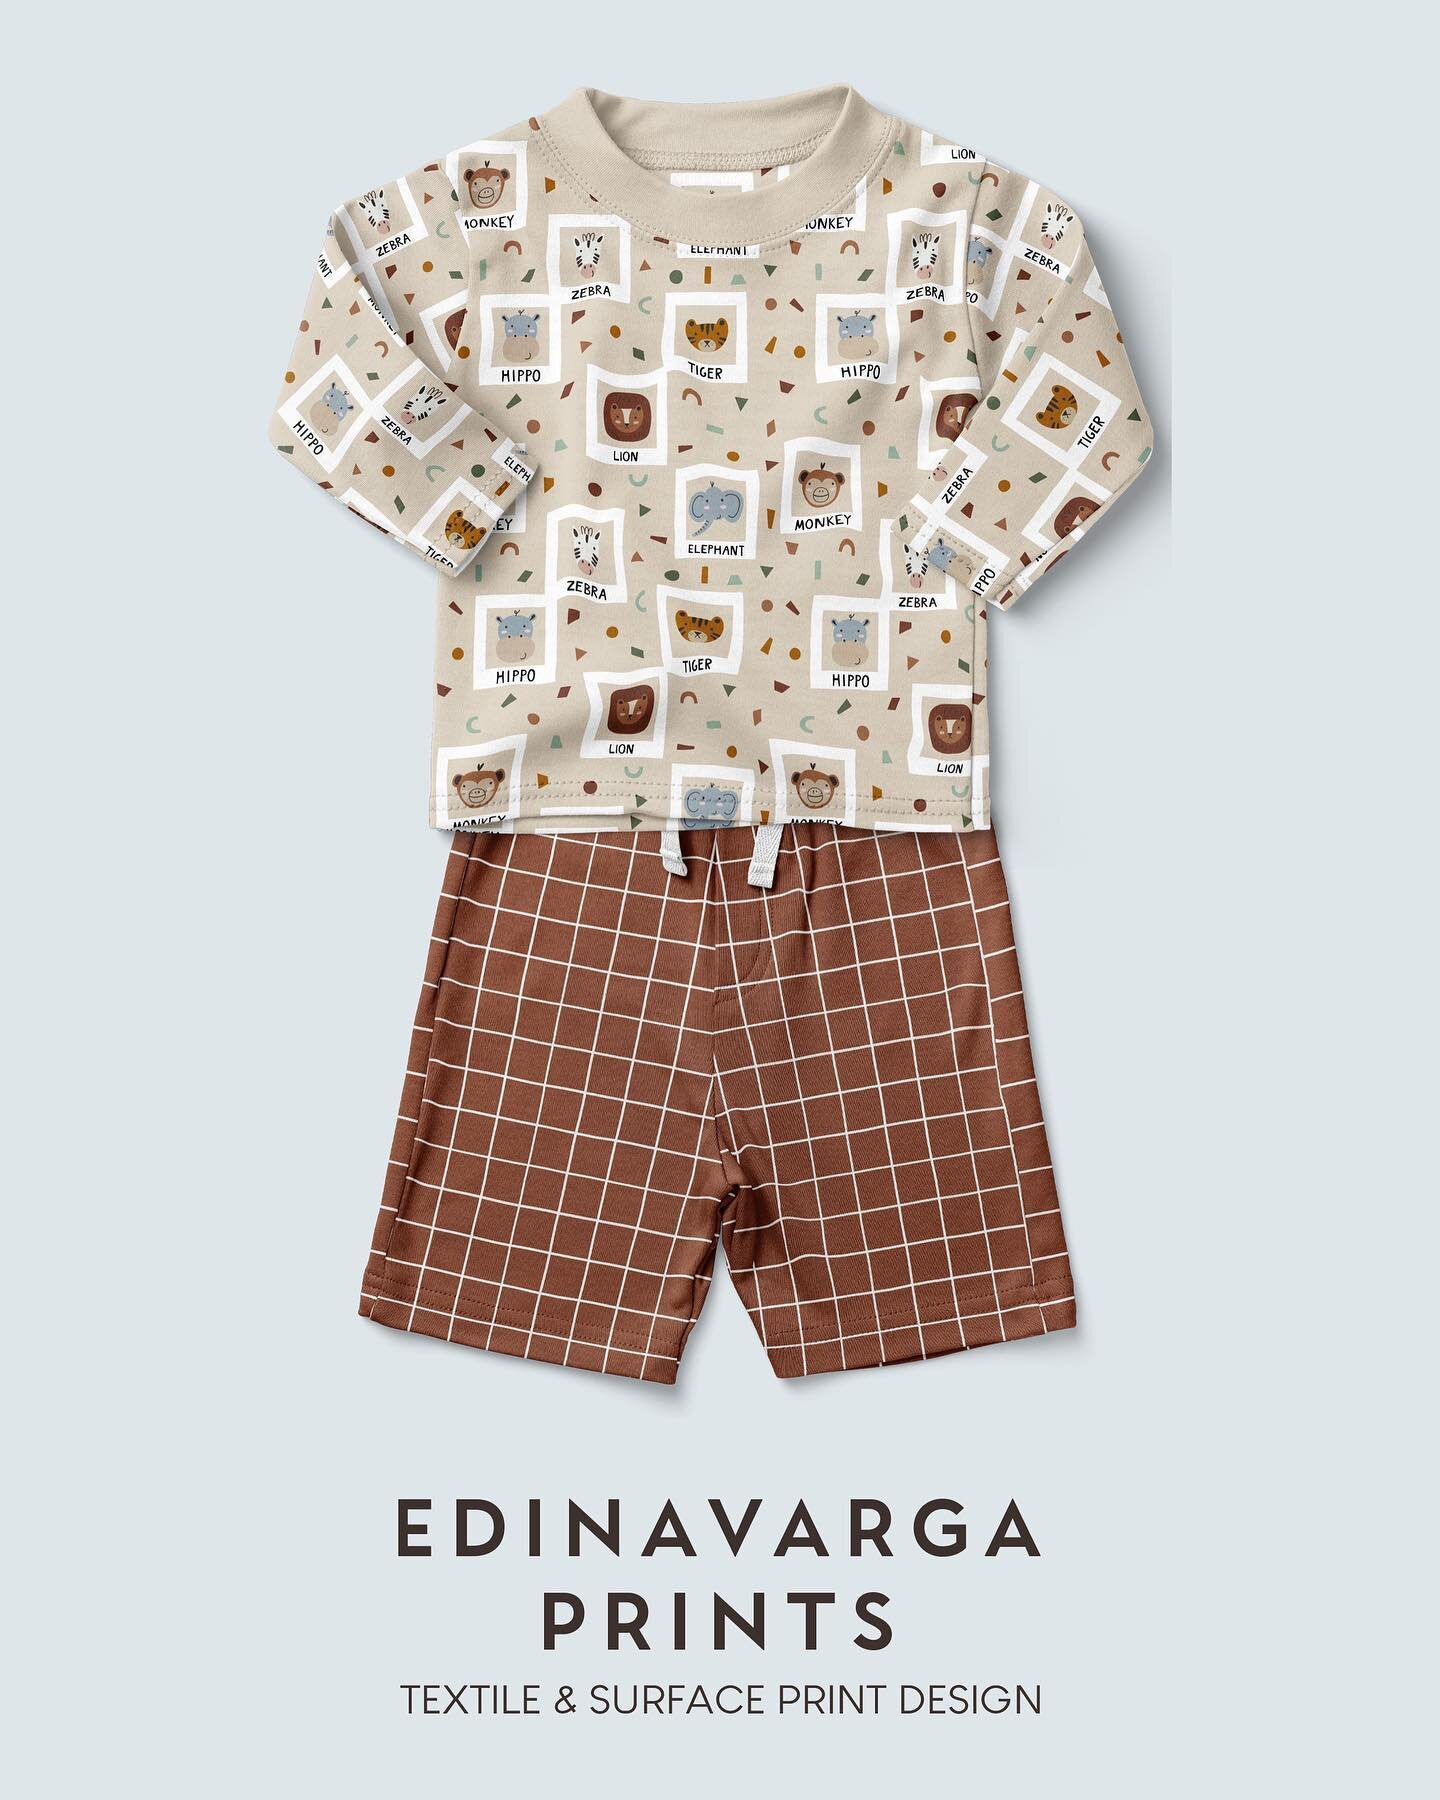 This beautiful print collection is perfect for kidswear! 🐯🐵🦁 It&rsquo;s now available in our online catalog:

www.edinavarga.com

You can find there a lot of ready-to-buy designs. If you can&rsquo;t find the print you need, we also offer custom de